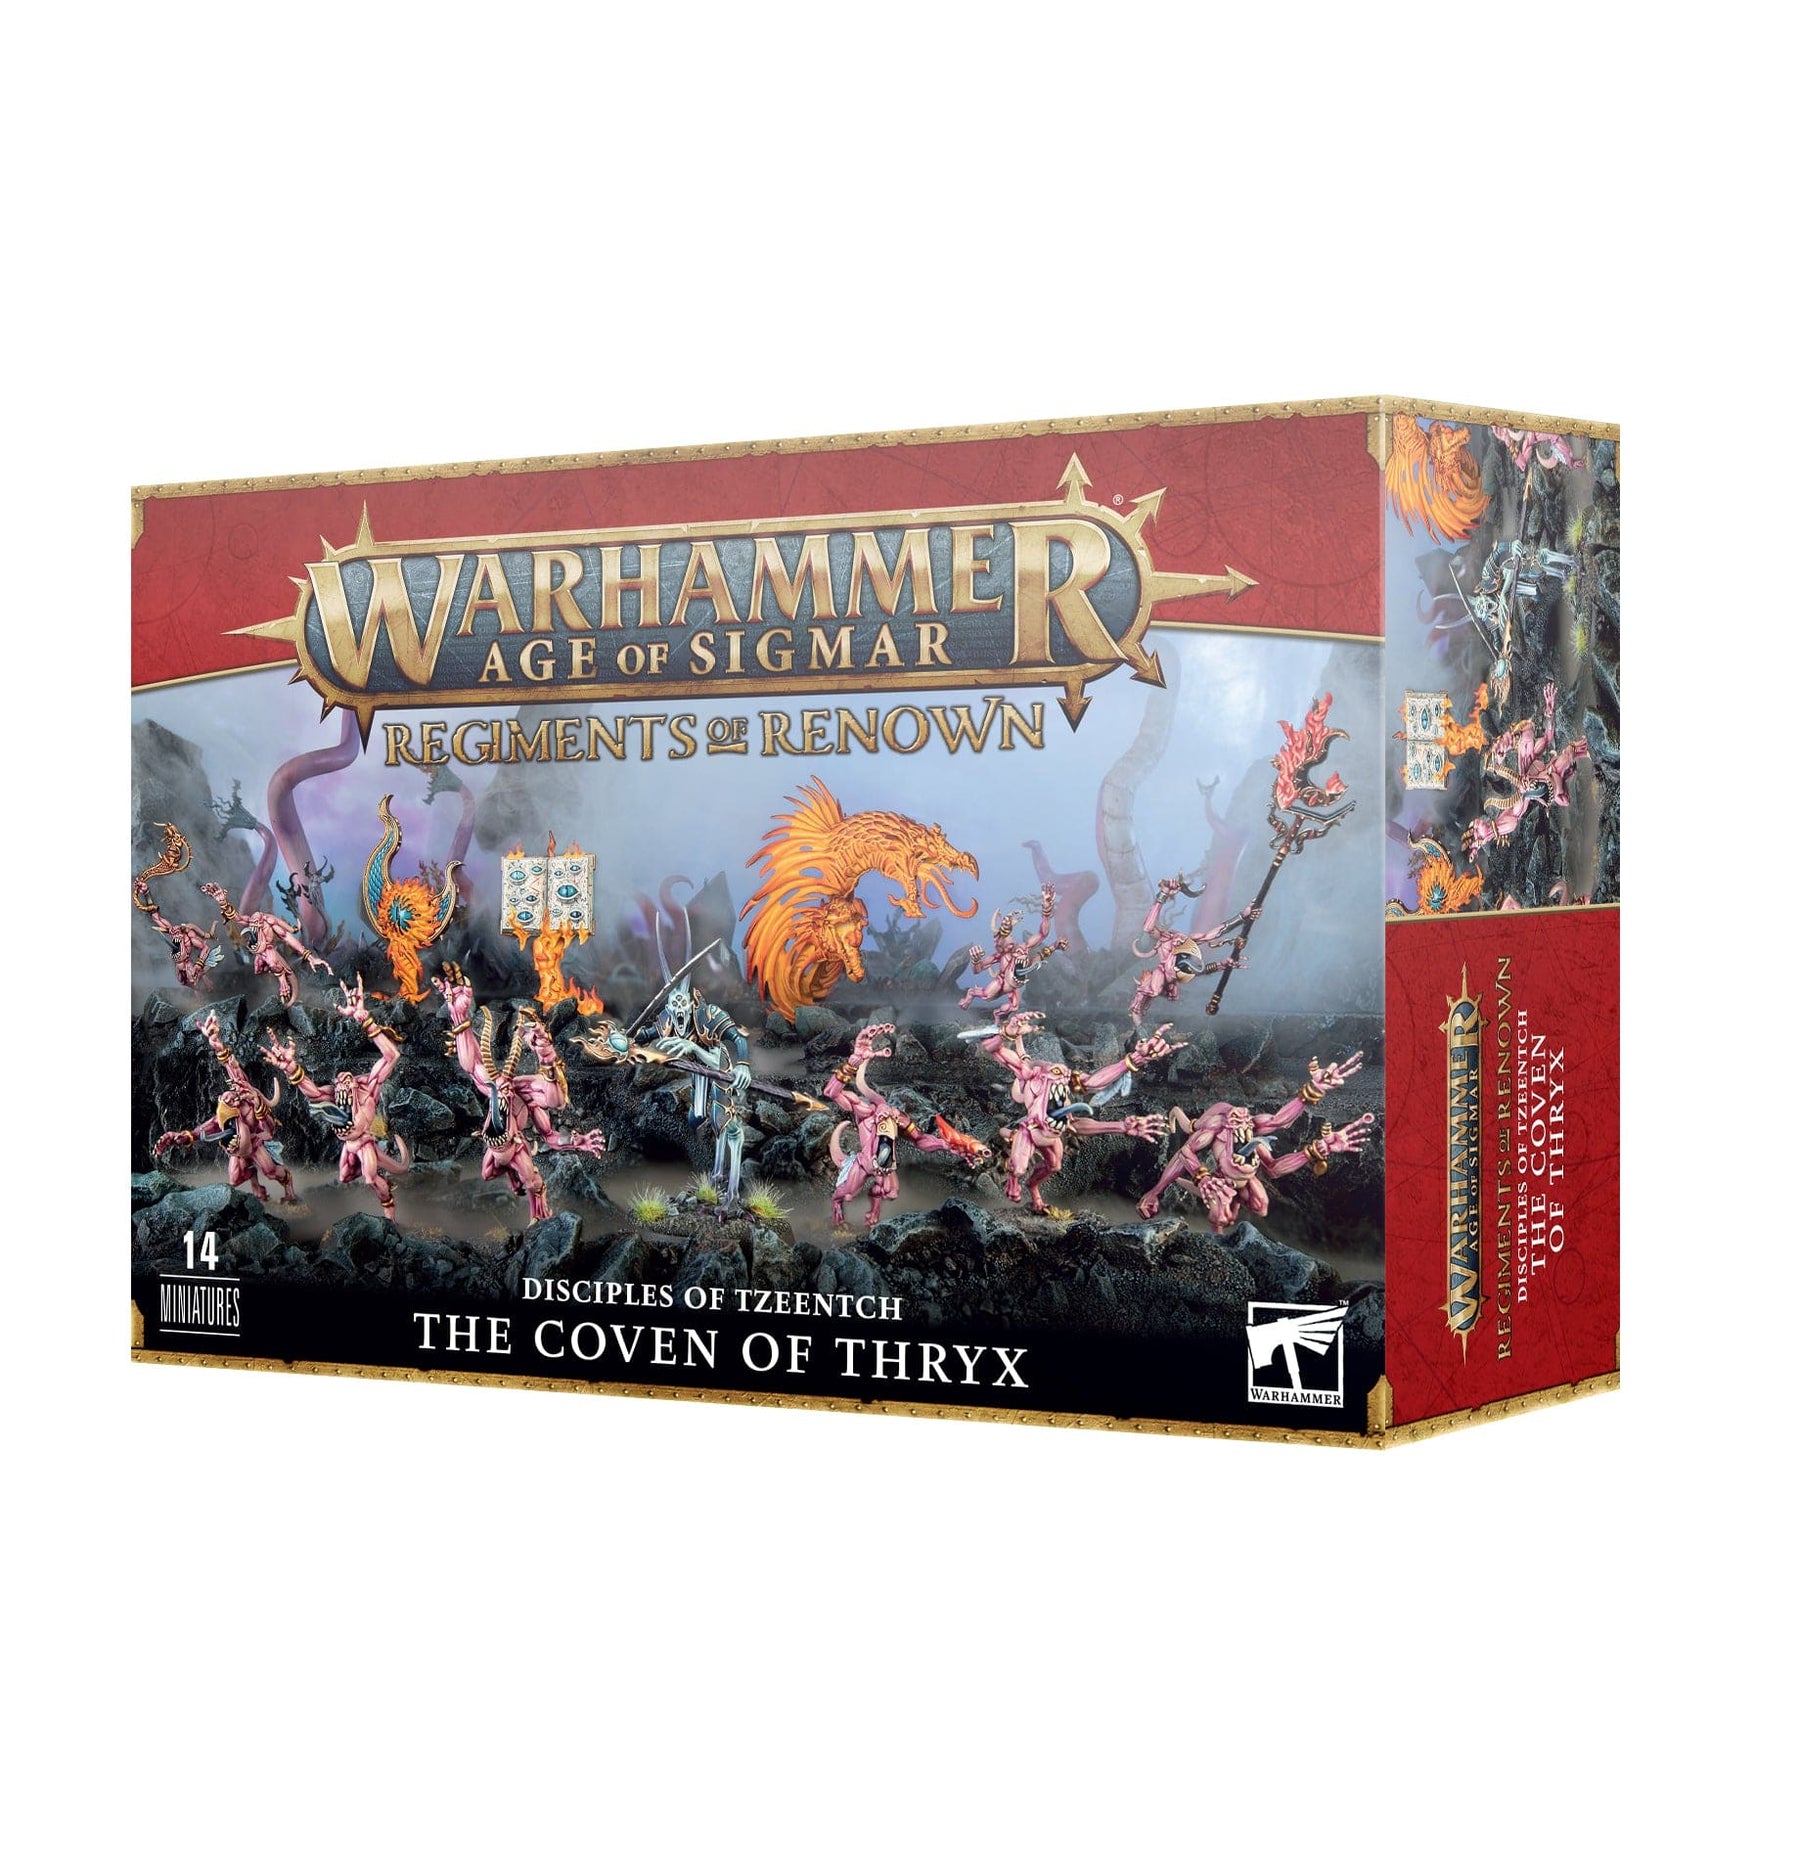 Warhammer - Age of Sigmar: Disciples of Tzeentch - Coven of Thryx